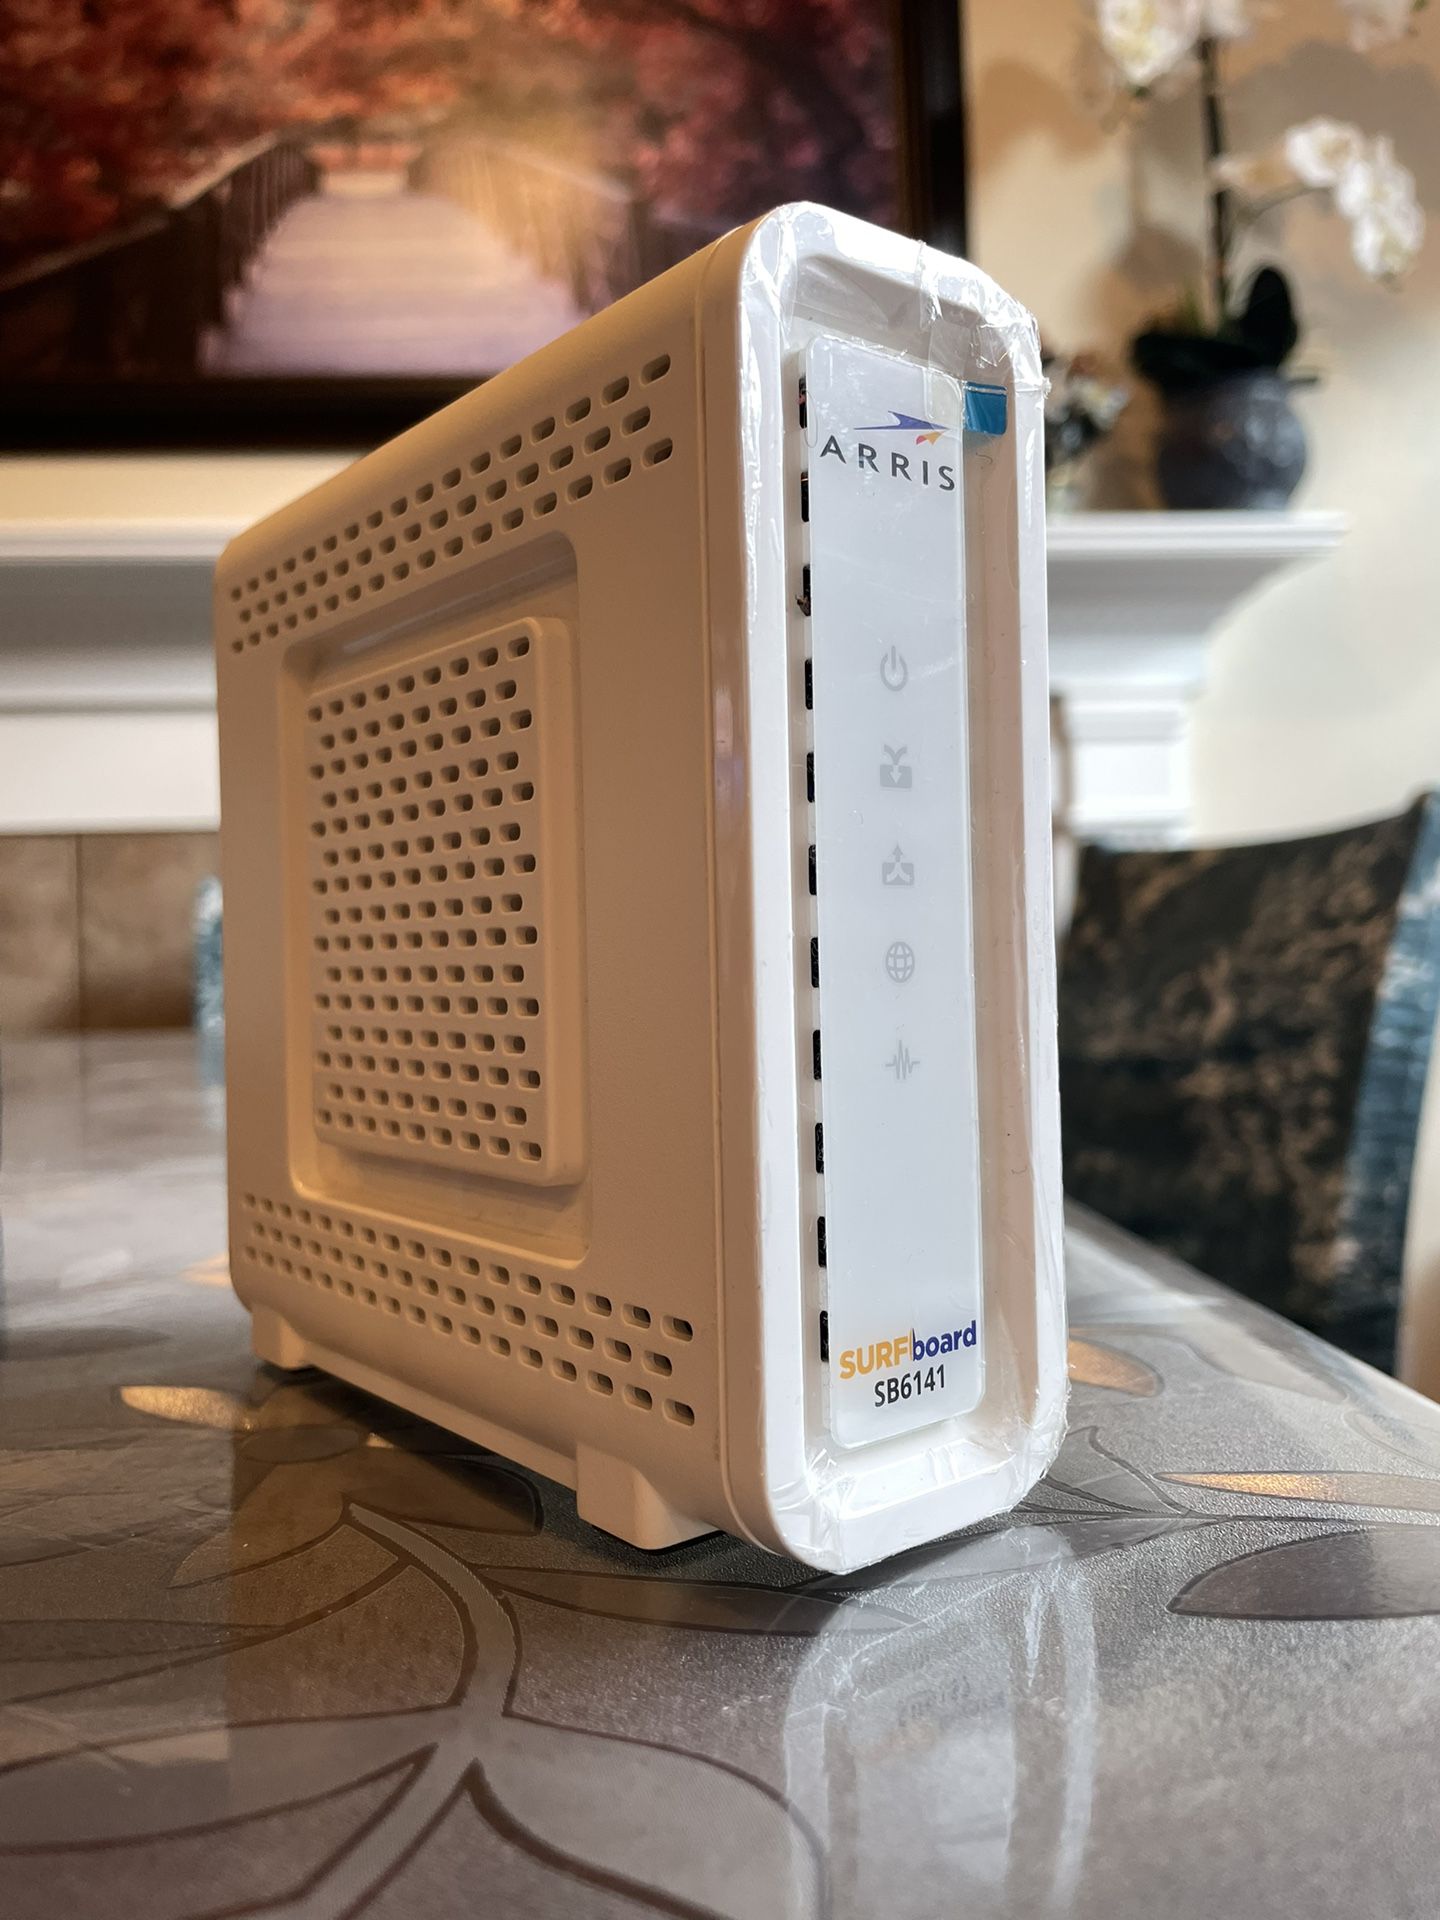 BASICALLY BRAND NEW ARRIS - SURFboard SB6183 16 x 4 DOCSIS 3.0 Cable Modem - White